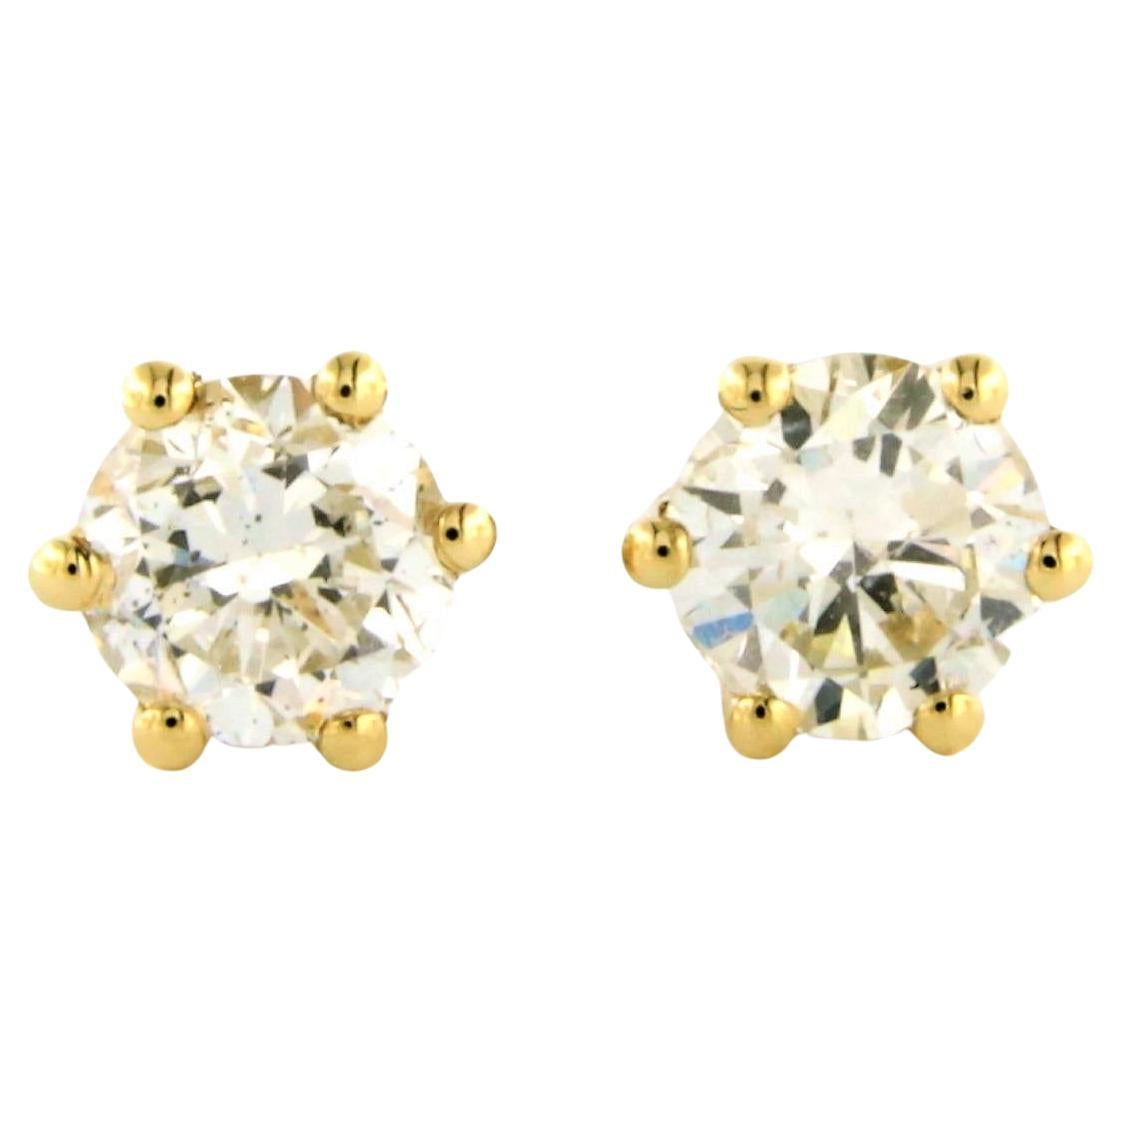 Earring studs set with diamonds in total 1.44ct 14k yellow gold